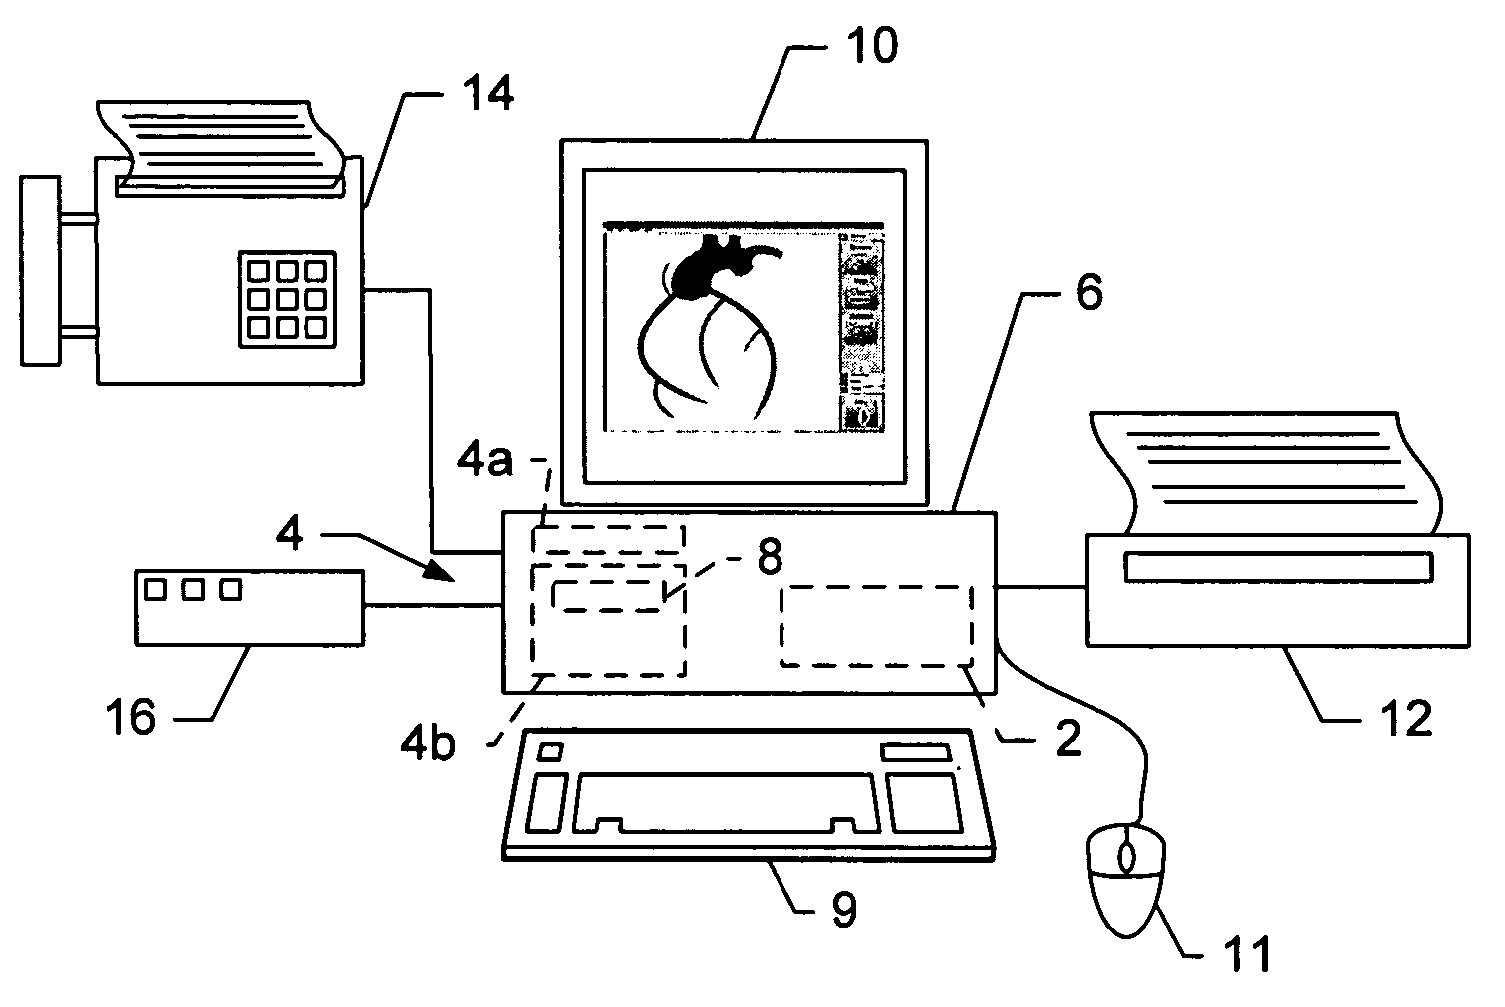 System, method and computer program product for graphically illustrating entities and generating a text-based report therefrom